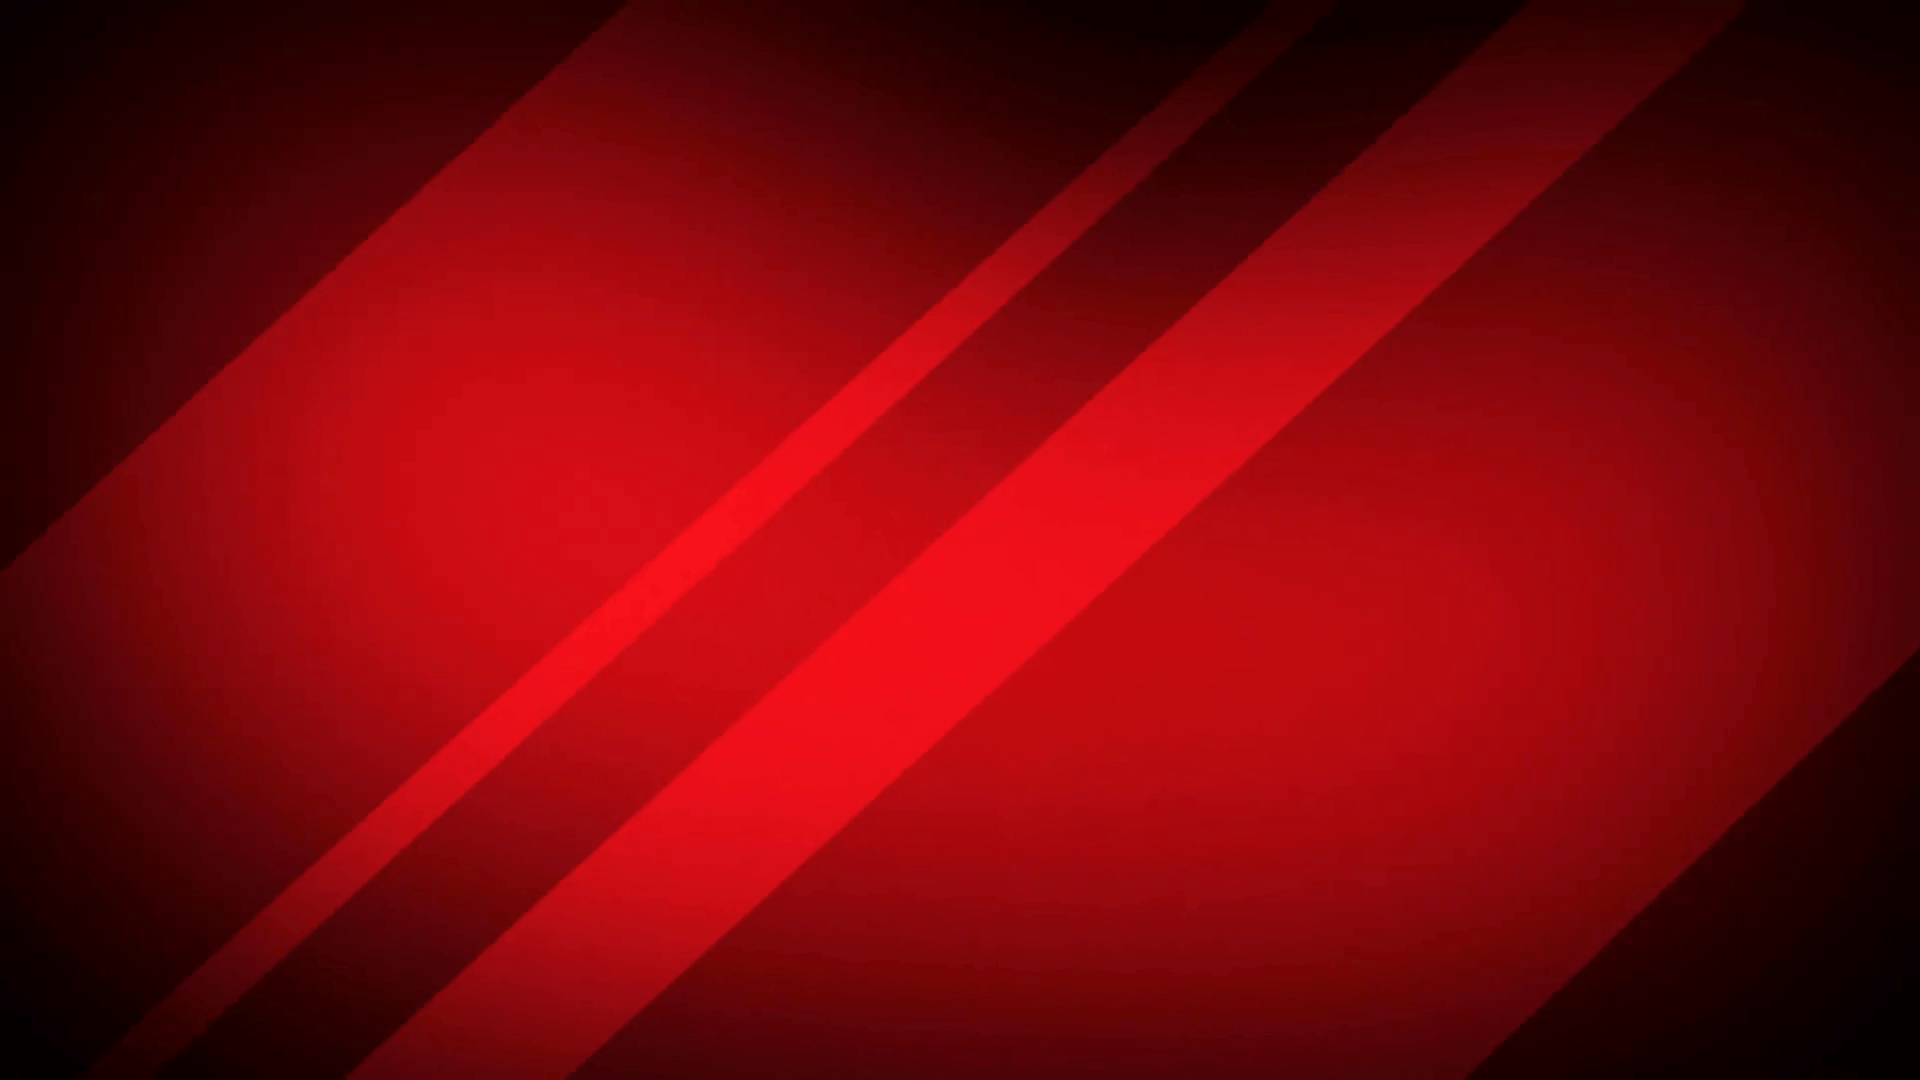 Background animation with a red modern graphics (loop). Motion